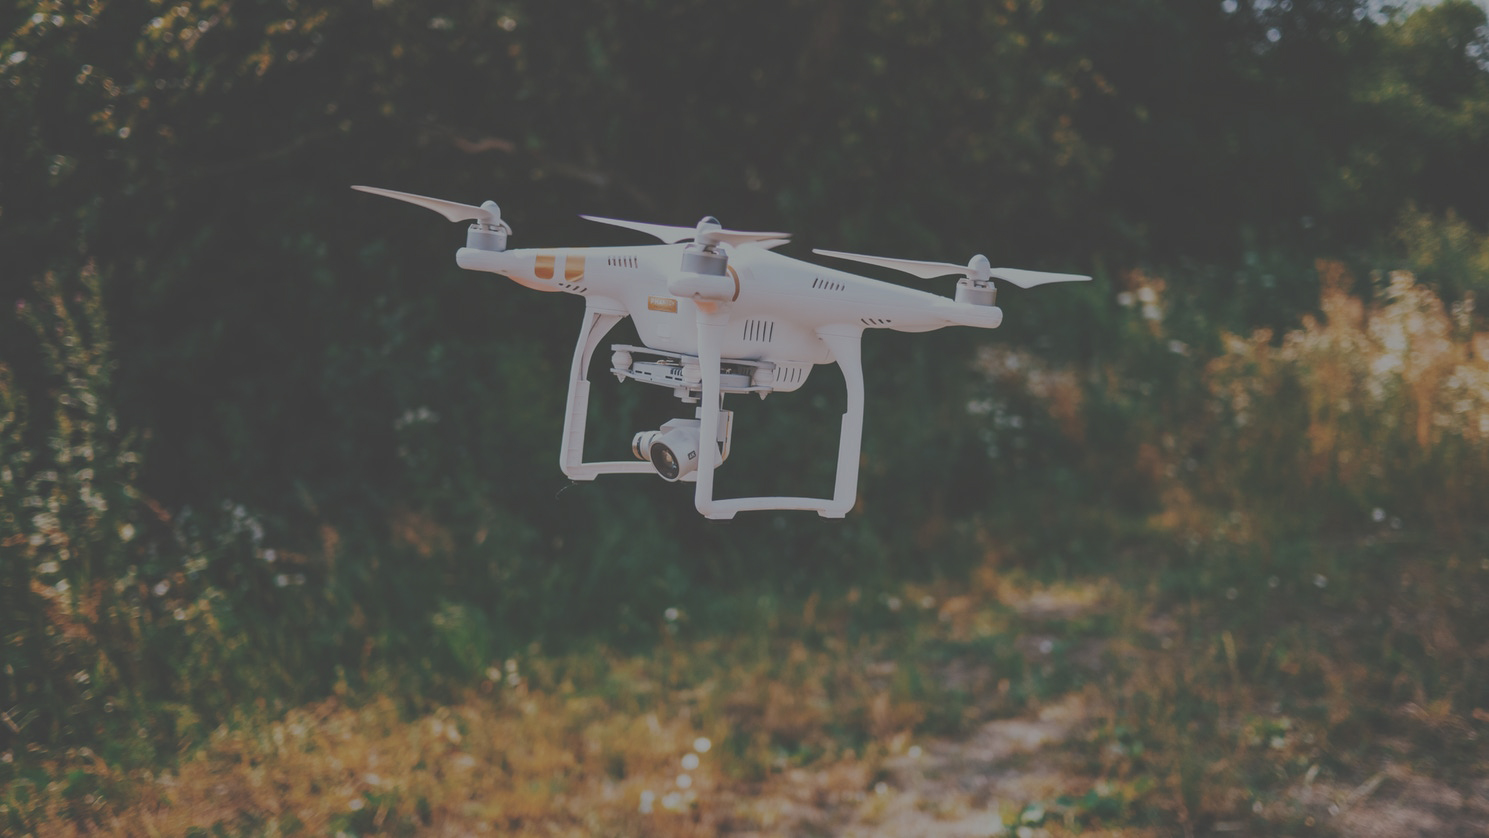 Drone Regulations: What You Need to Know